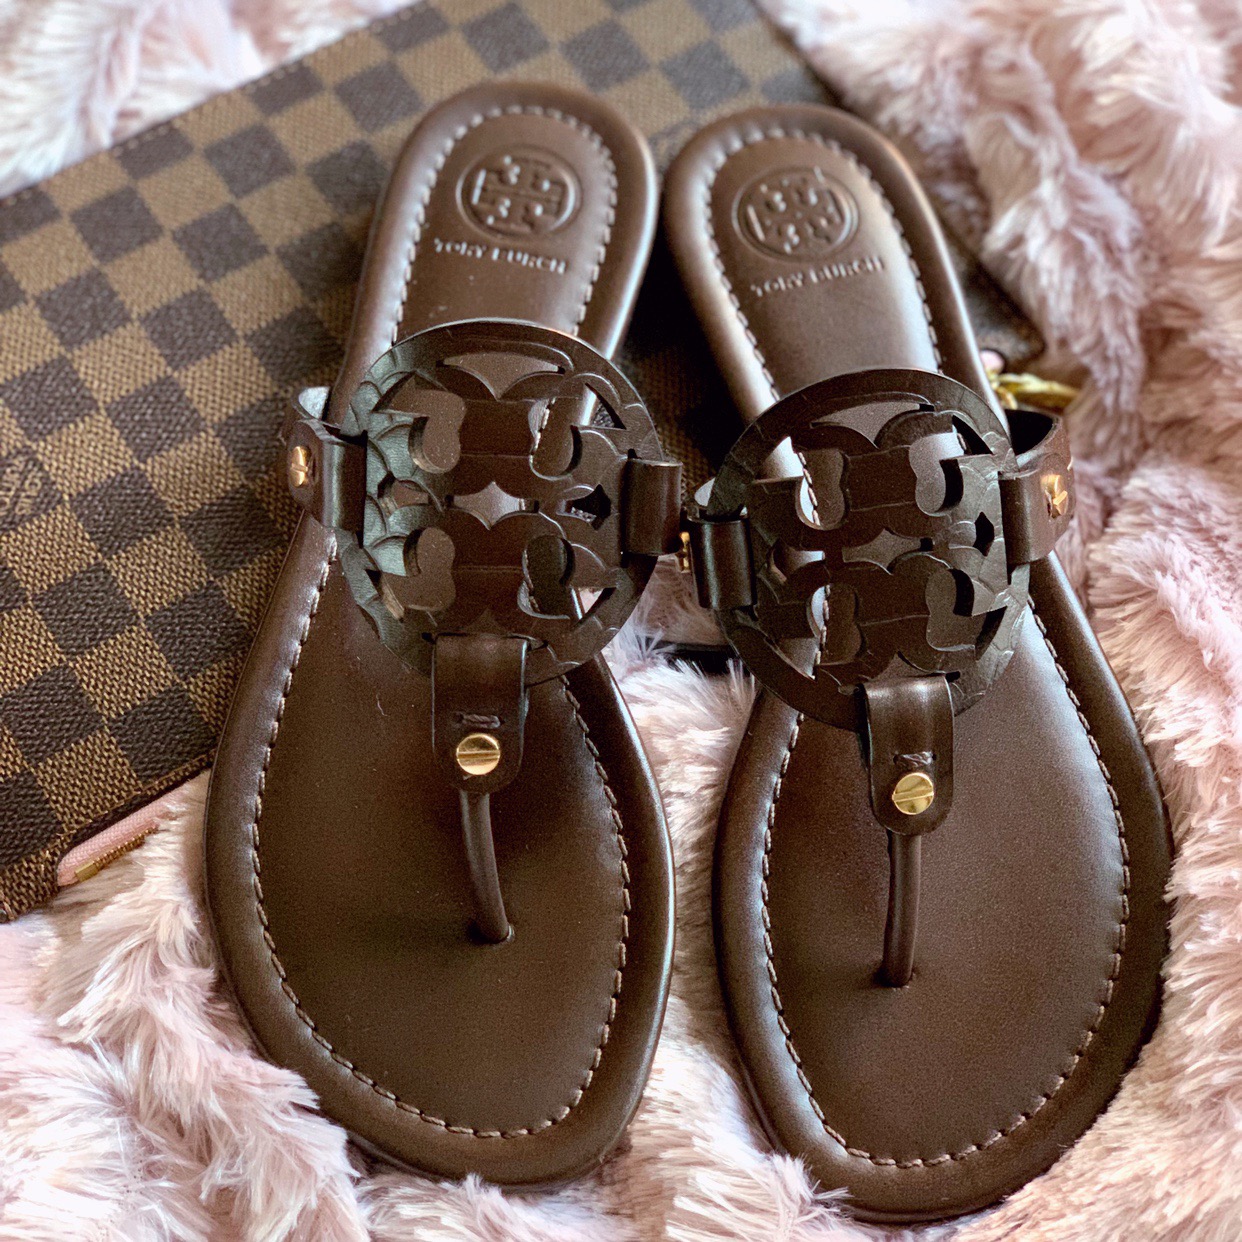 Tory Burch New Markdowns! Miller Sandals, Flats, Bags & More!! - The Double  Take Girls